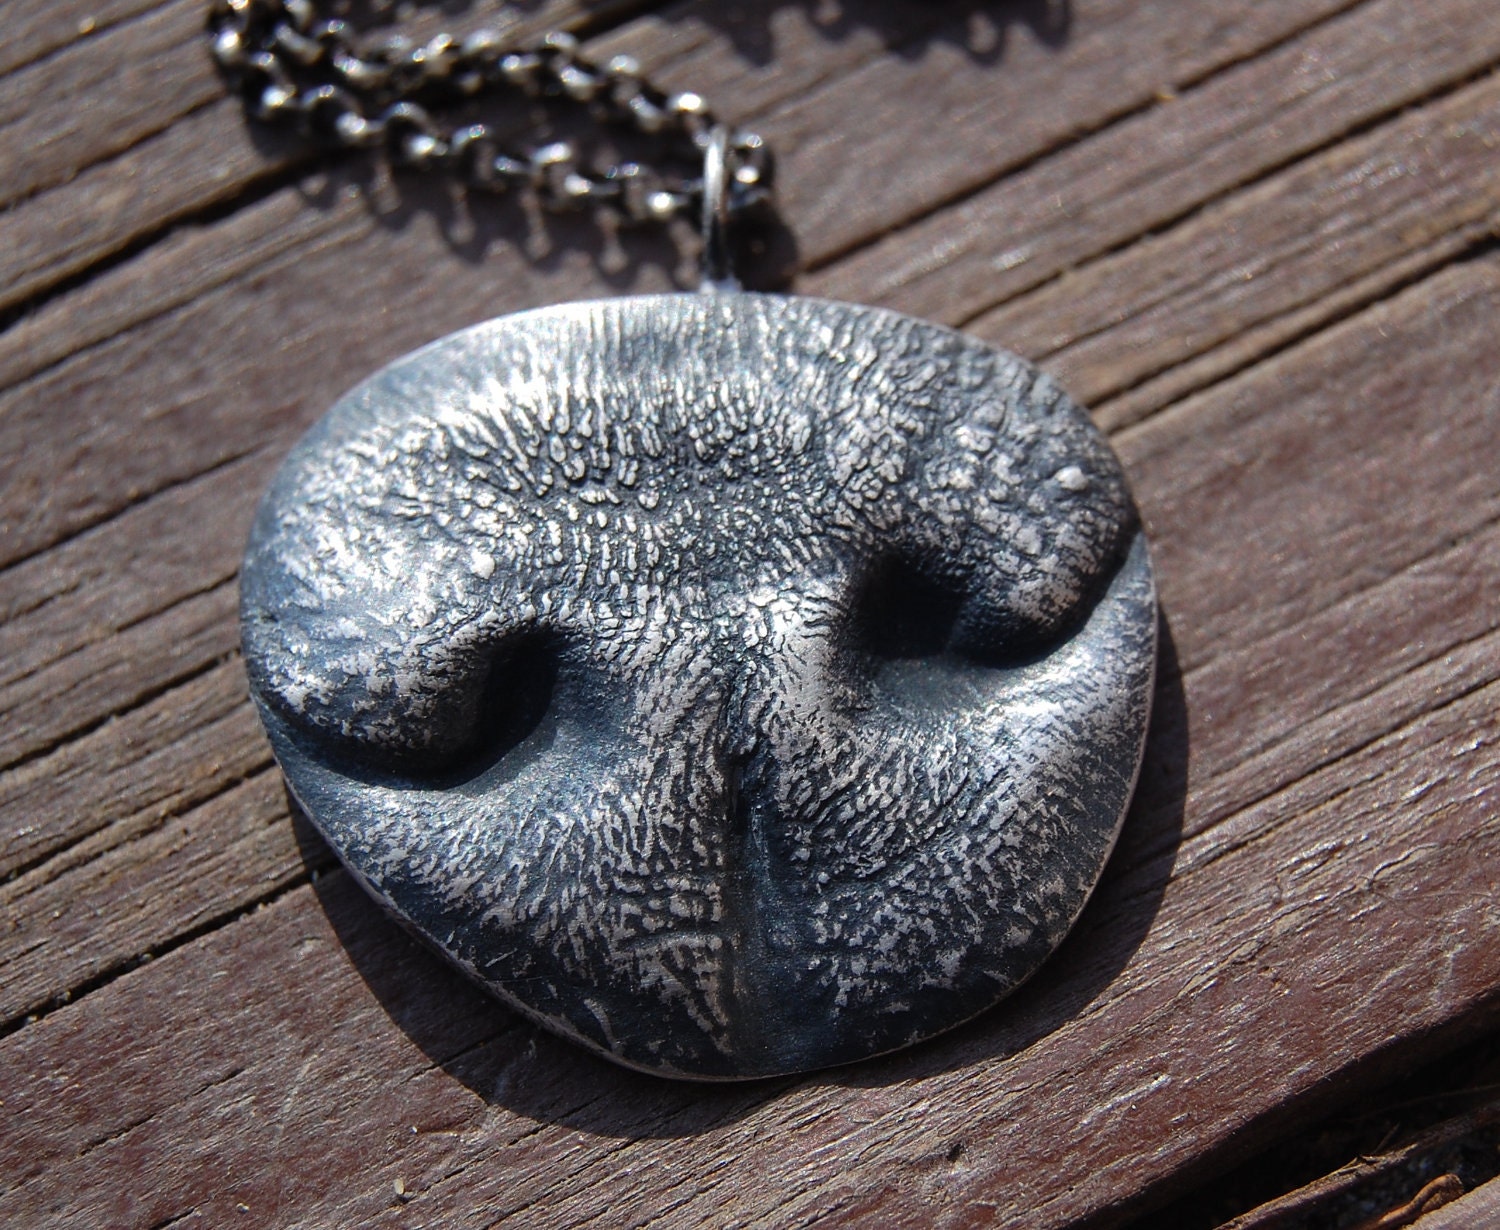 SMALL Dog or Cat Nose Print - Customized in Pure Silver with a Sterling Silver Chain